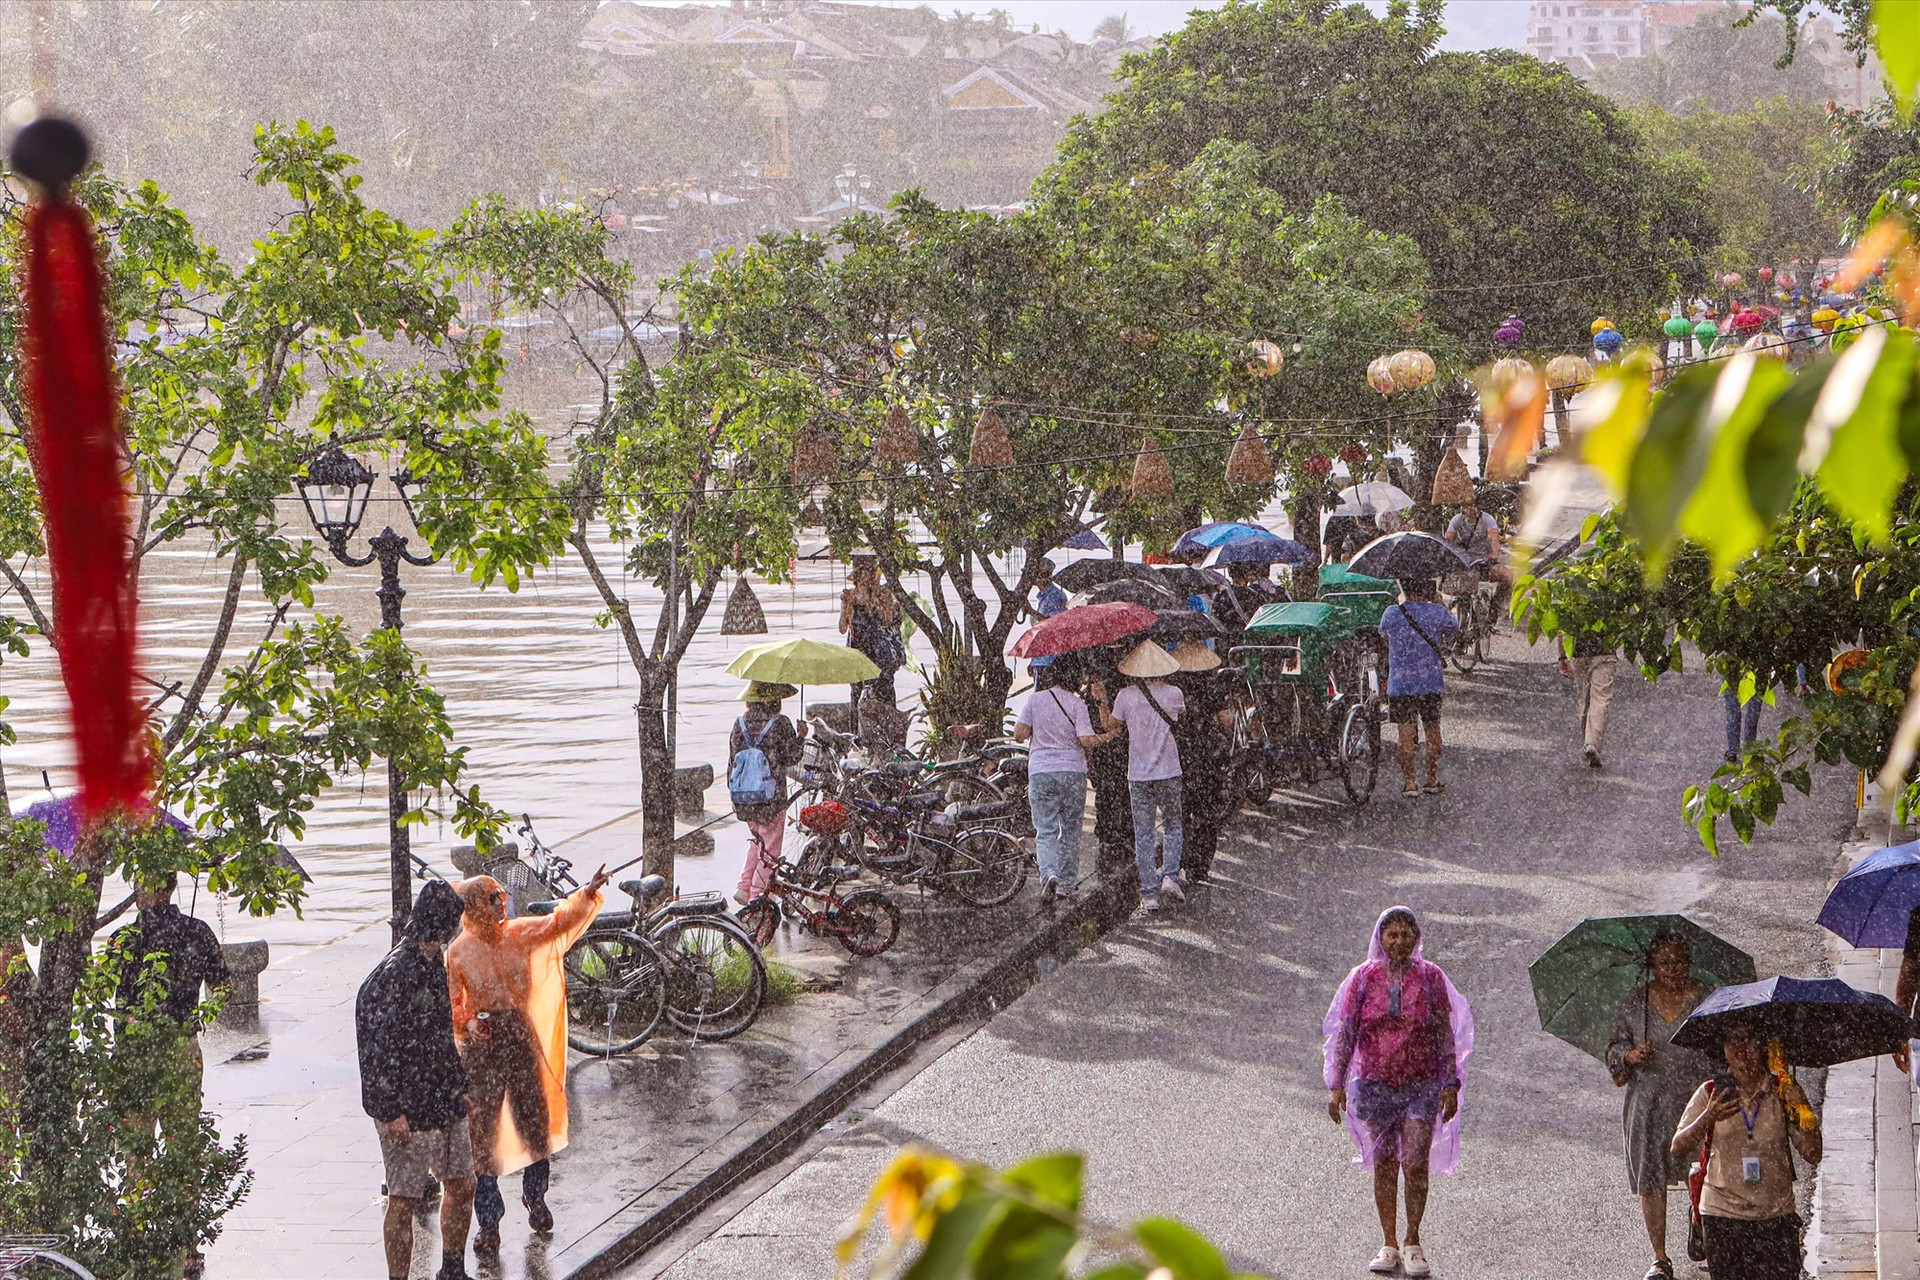 Hoi An becomes more beautiful and charming in both rainy and sunny moments.